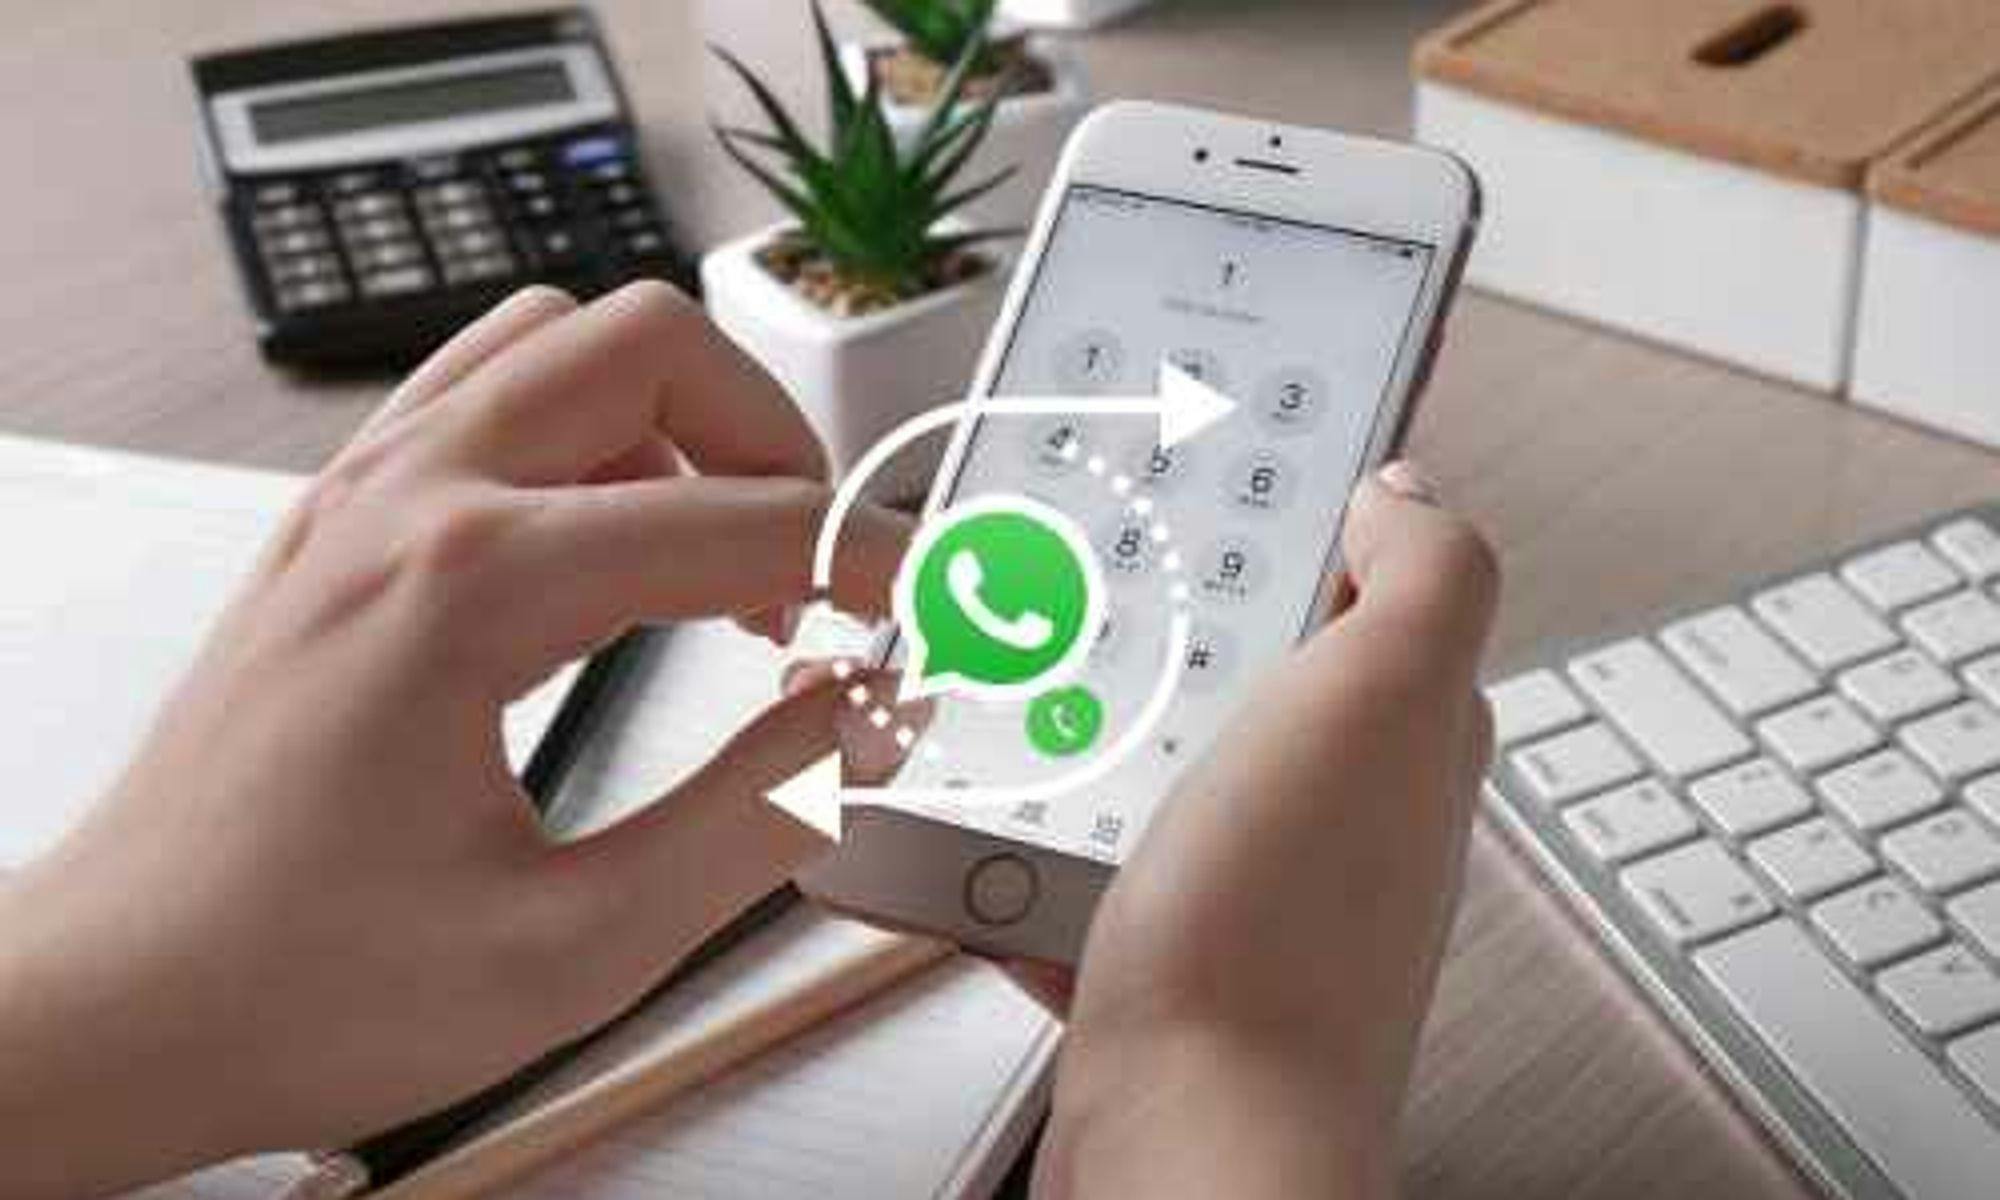 How To Change Your WhatsApp Number (And Not Lose Everything)